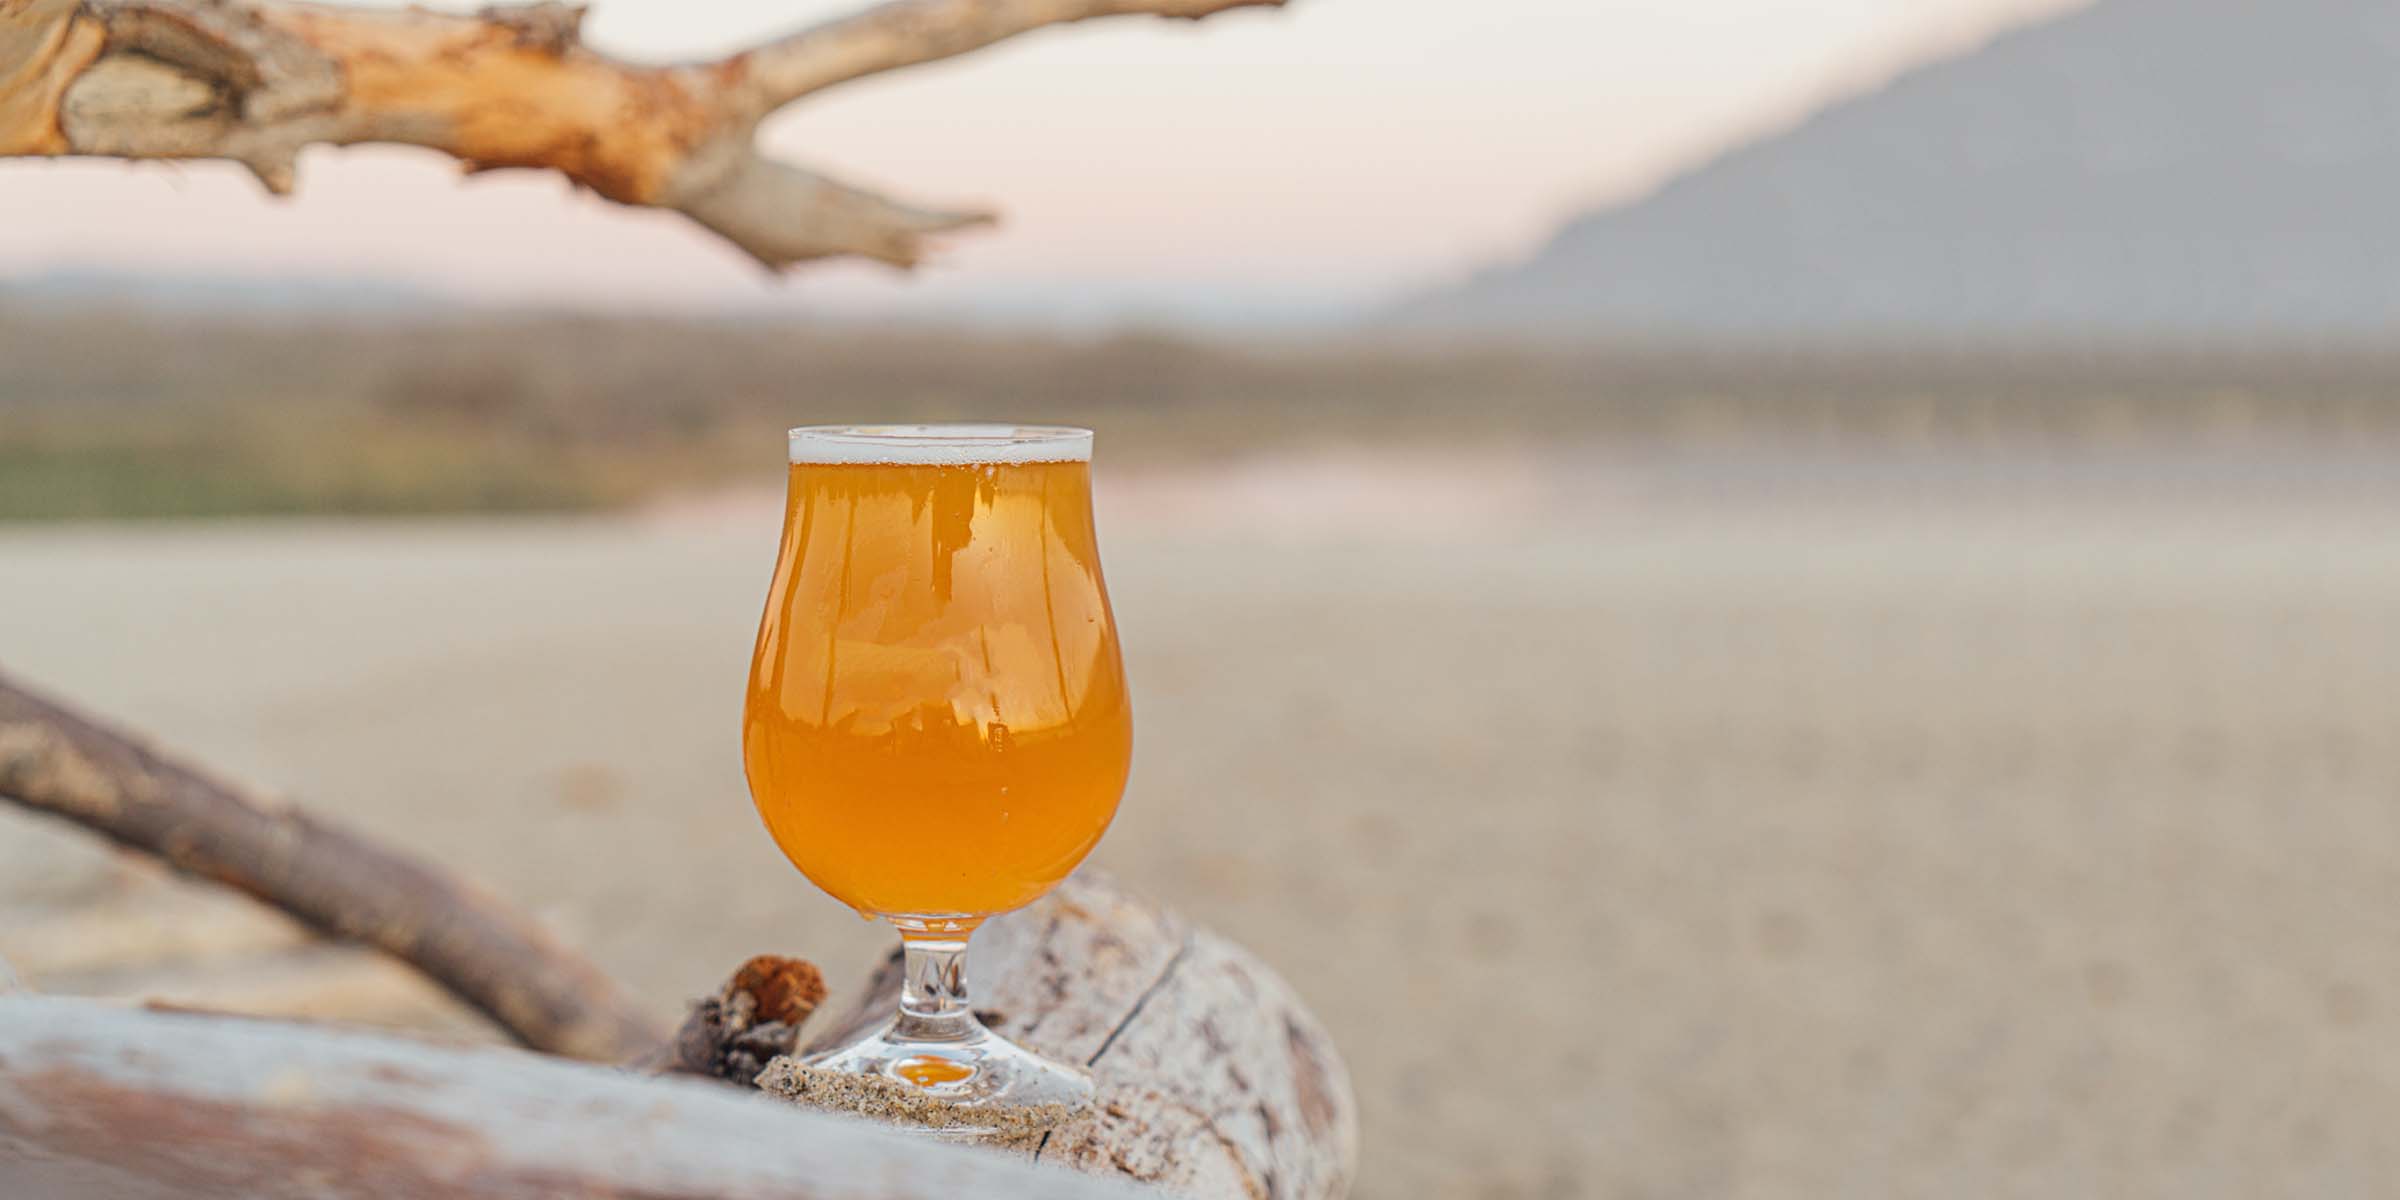 7 Of The Best Light Beers For Beer Lovers (2023)